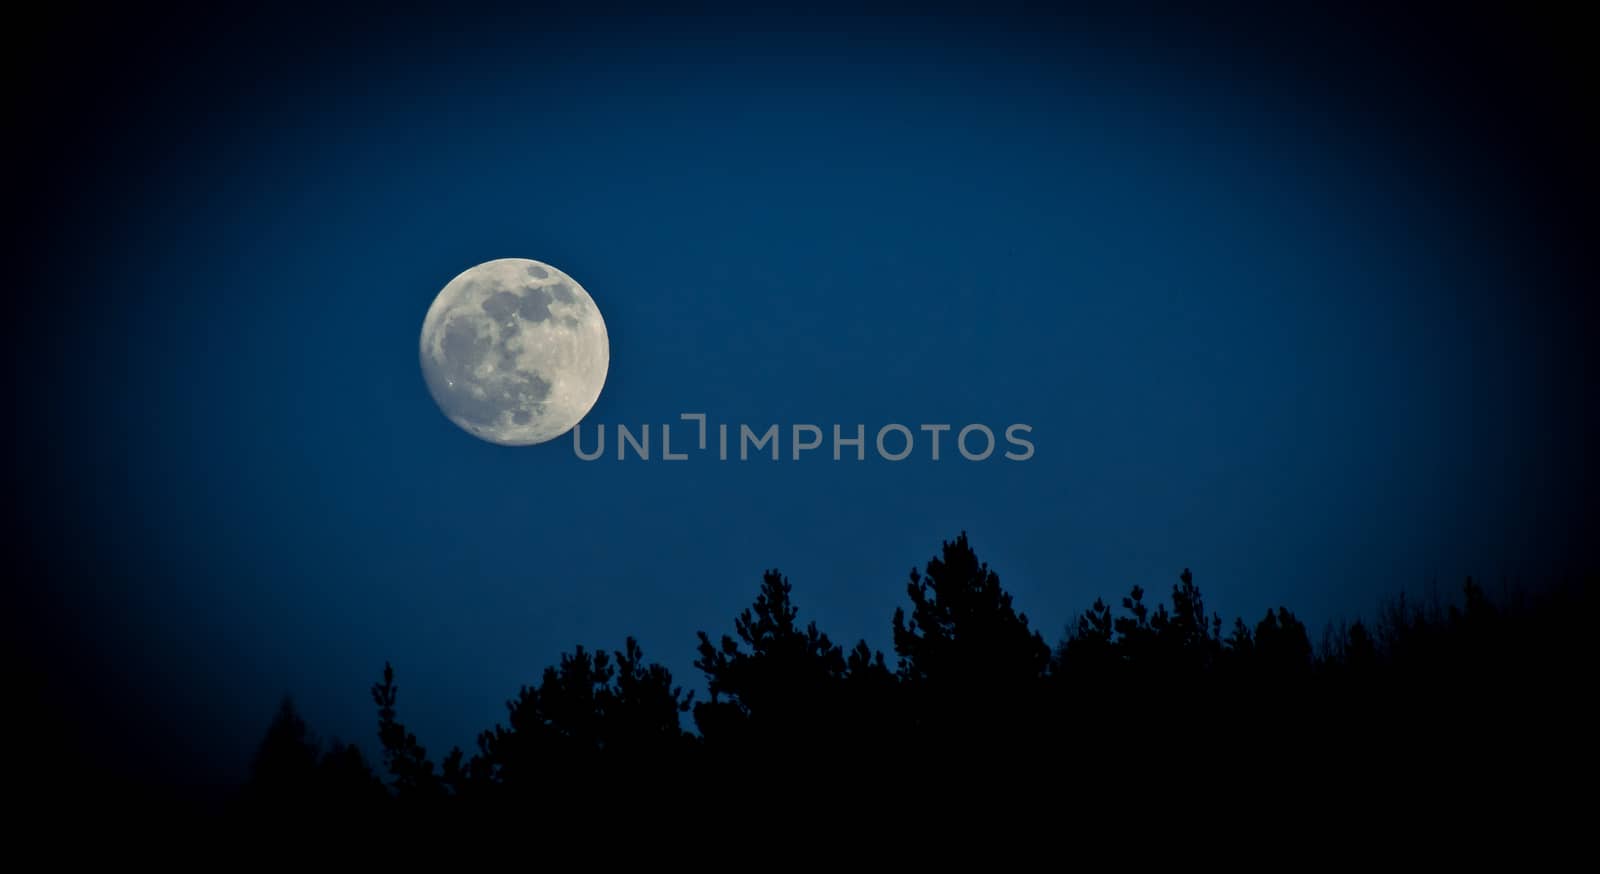 moon over the trees, dark background